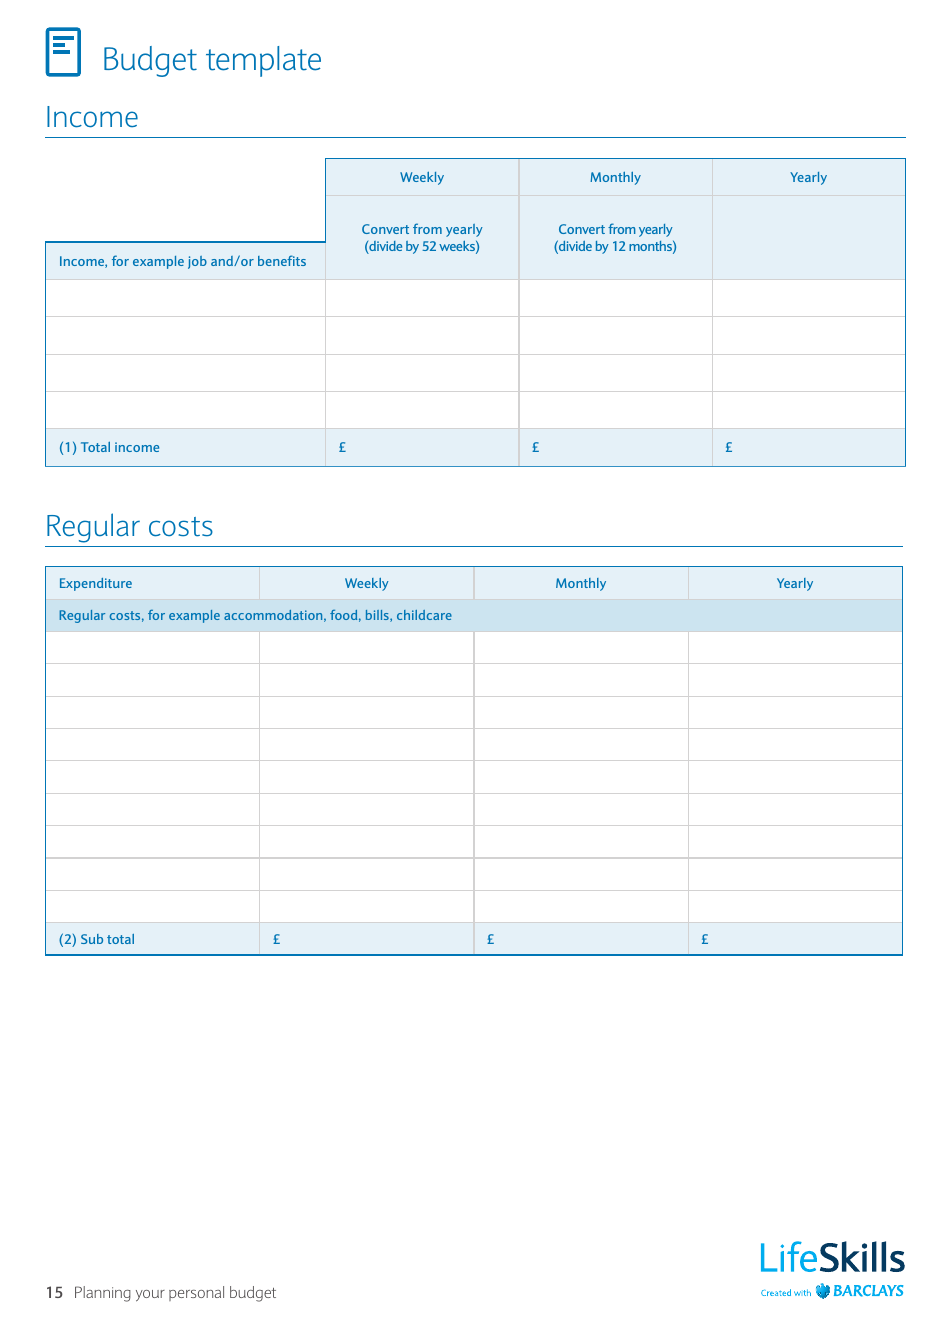 Budget Template - Free Download inner P_valorwhich.jpg